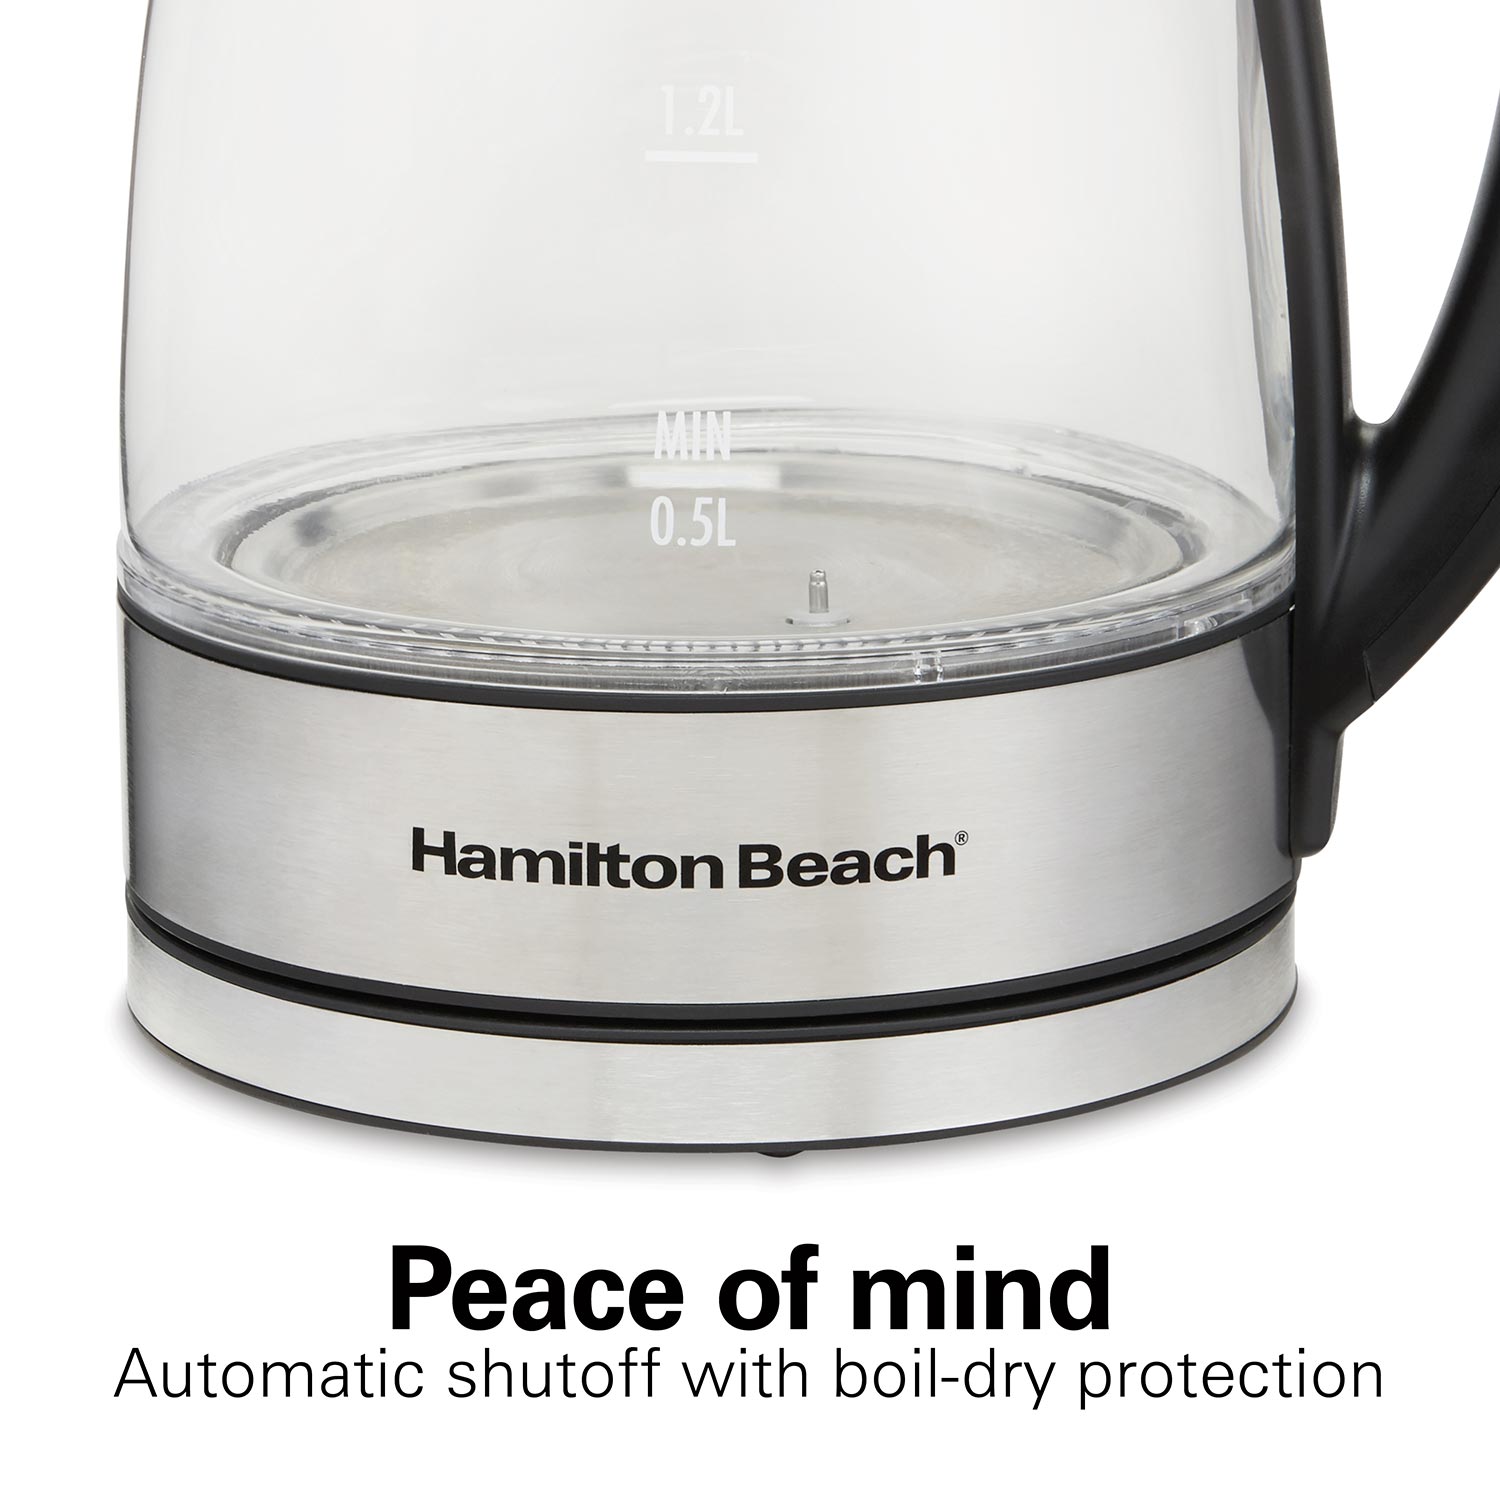 1.7L Cordless Electric Glass Kettle with Auto Shut-Off